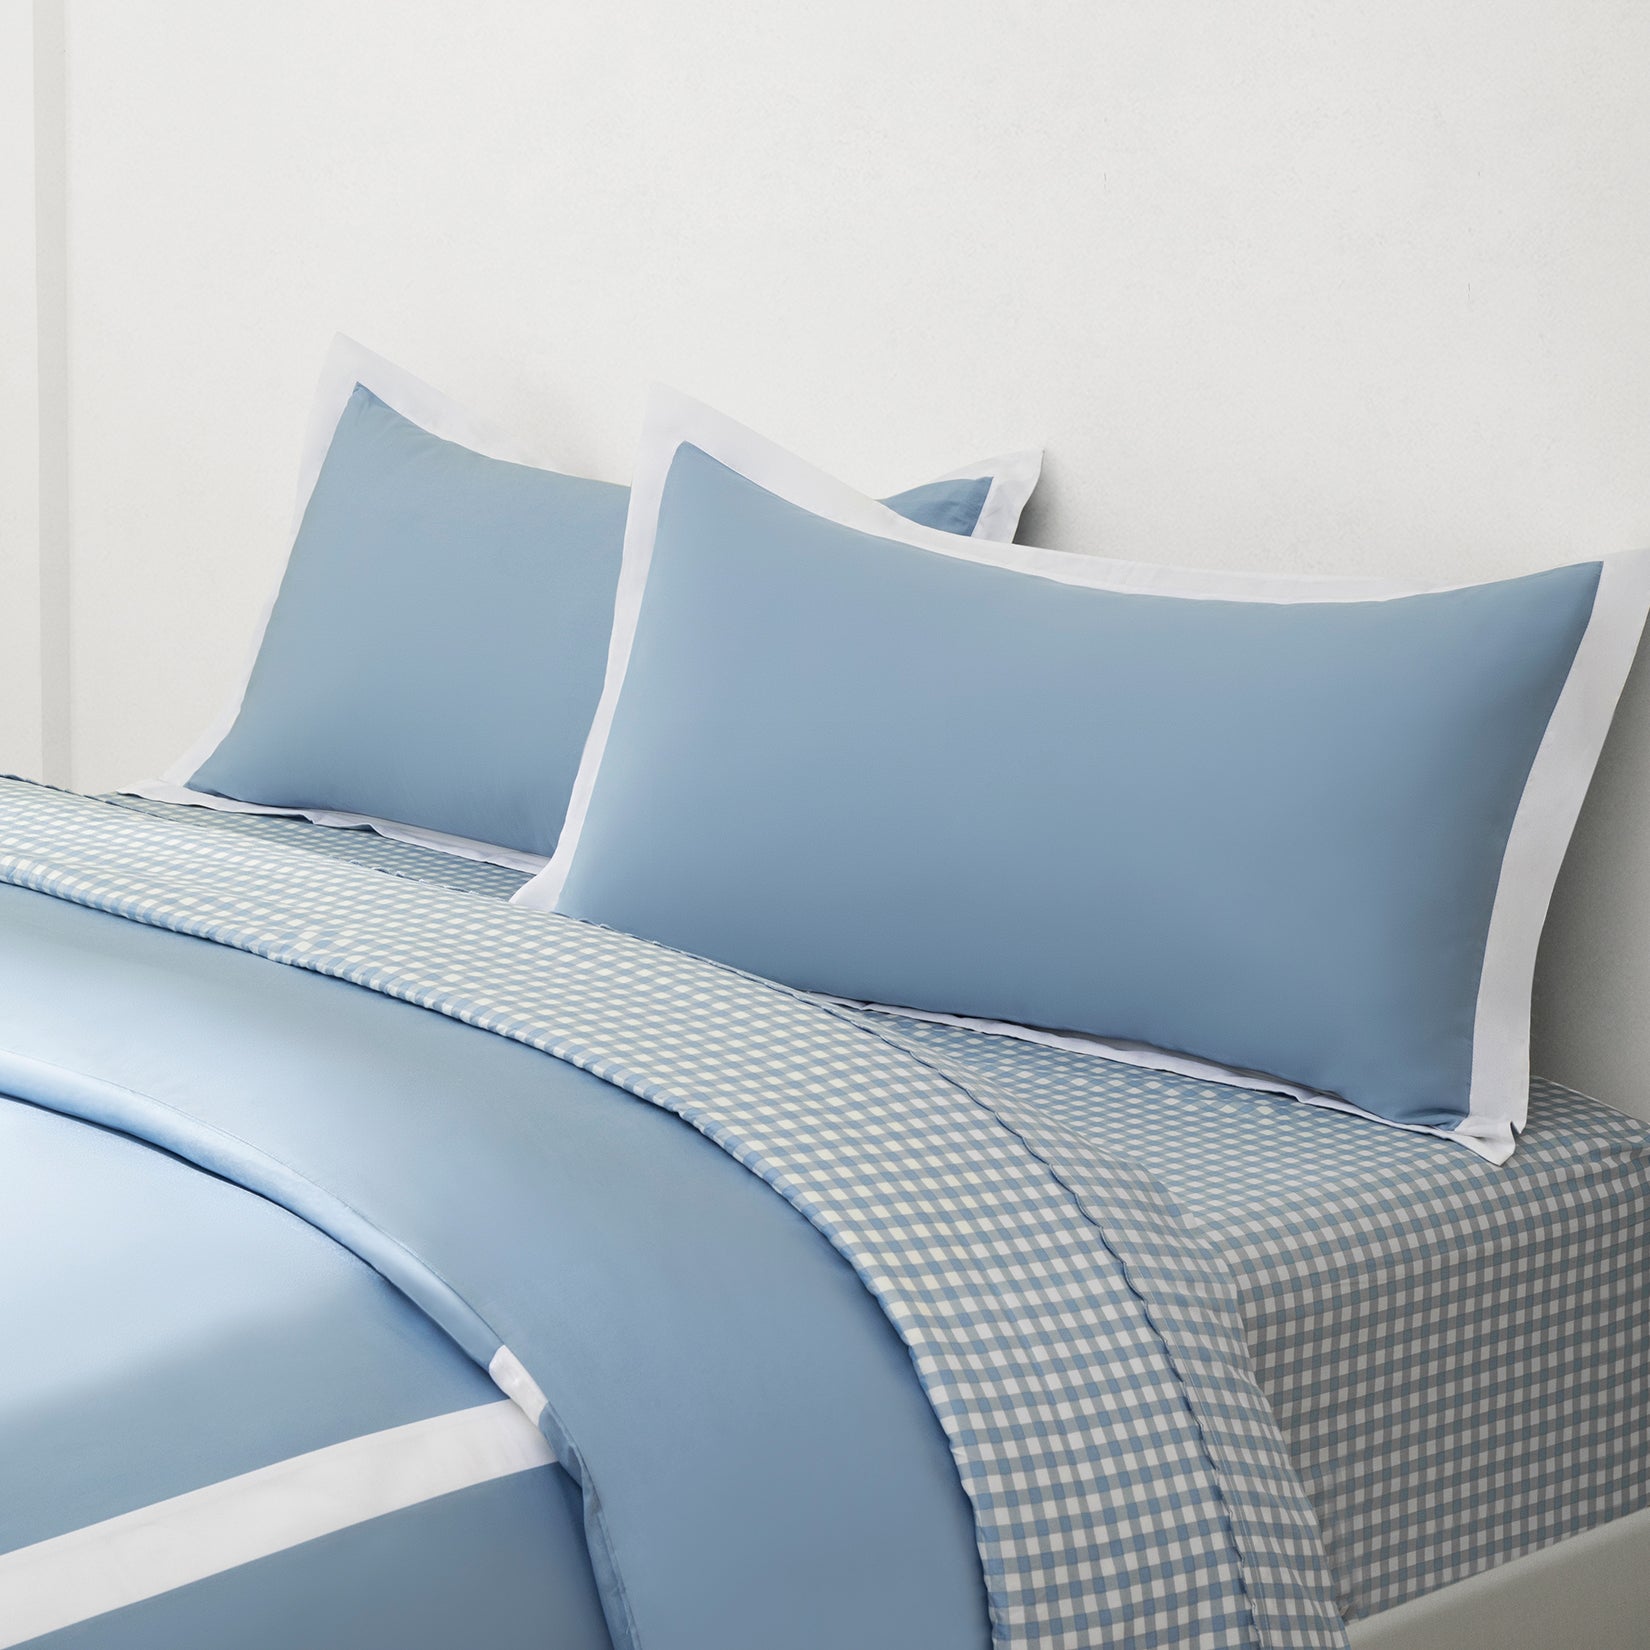 Paulina Sky Blue 200 thread count combed cotton duvet set. Sky blue and white pillows and sky blue and white sheets on gingham bed sheets.